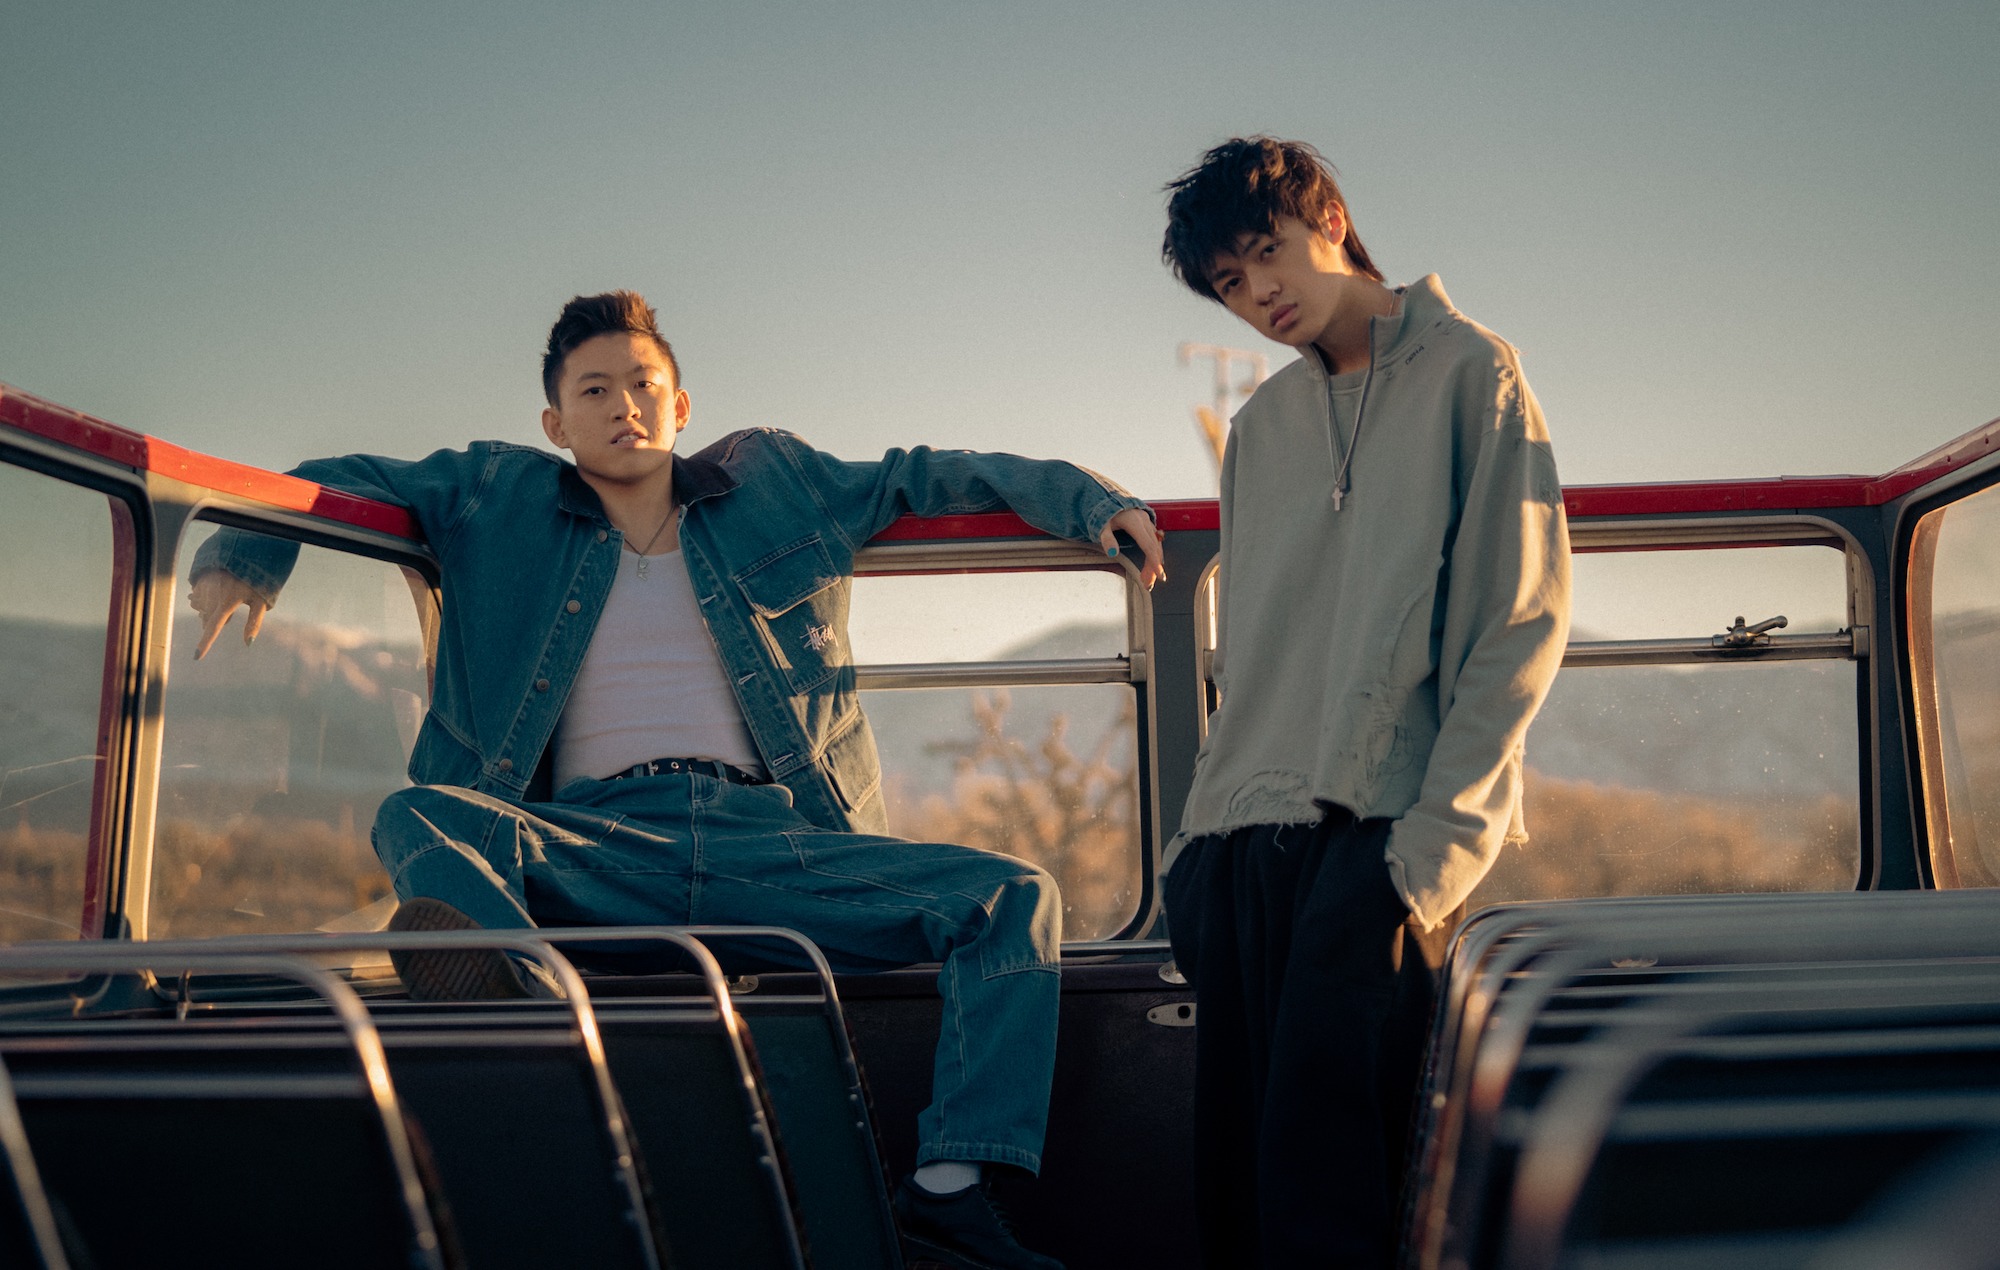 Warren Hue and Rich Brian on 88rising’s Coachella takeover: “We’re just so blessed”